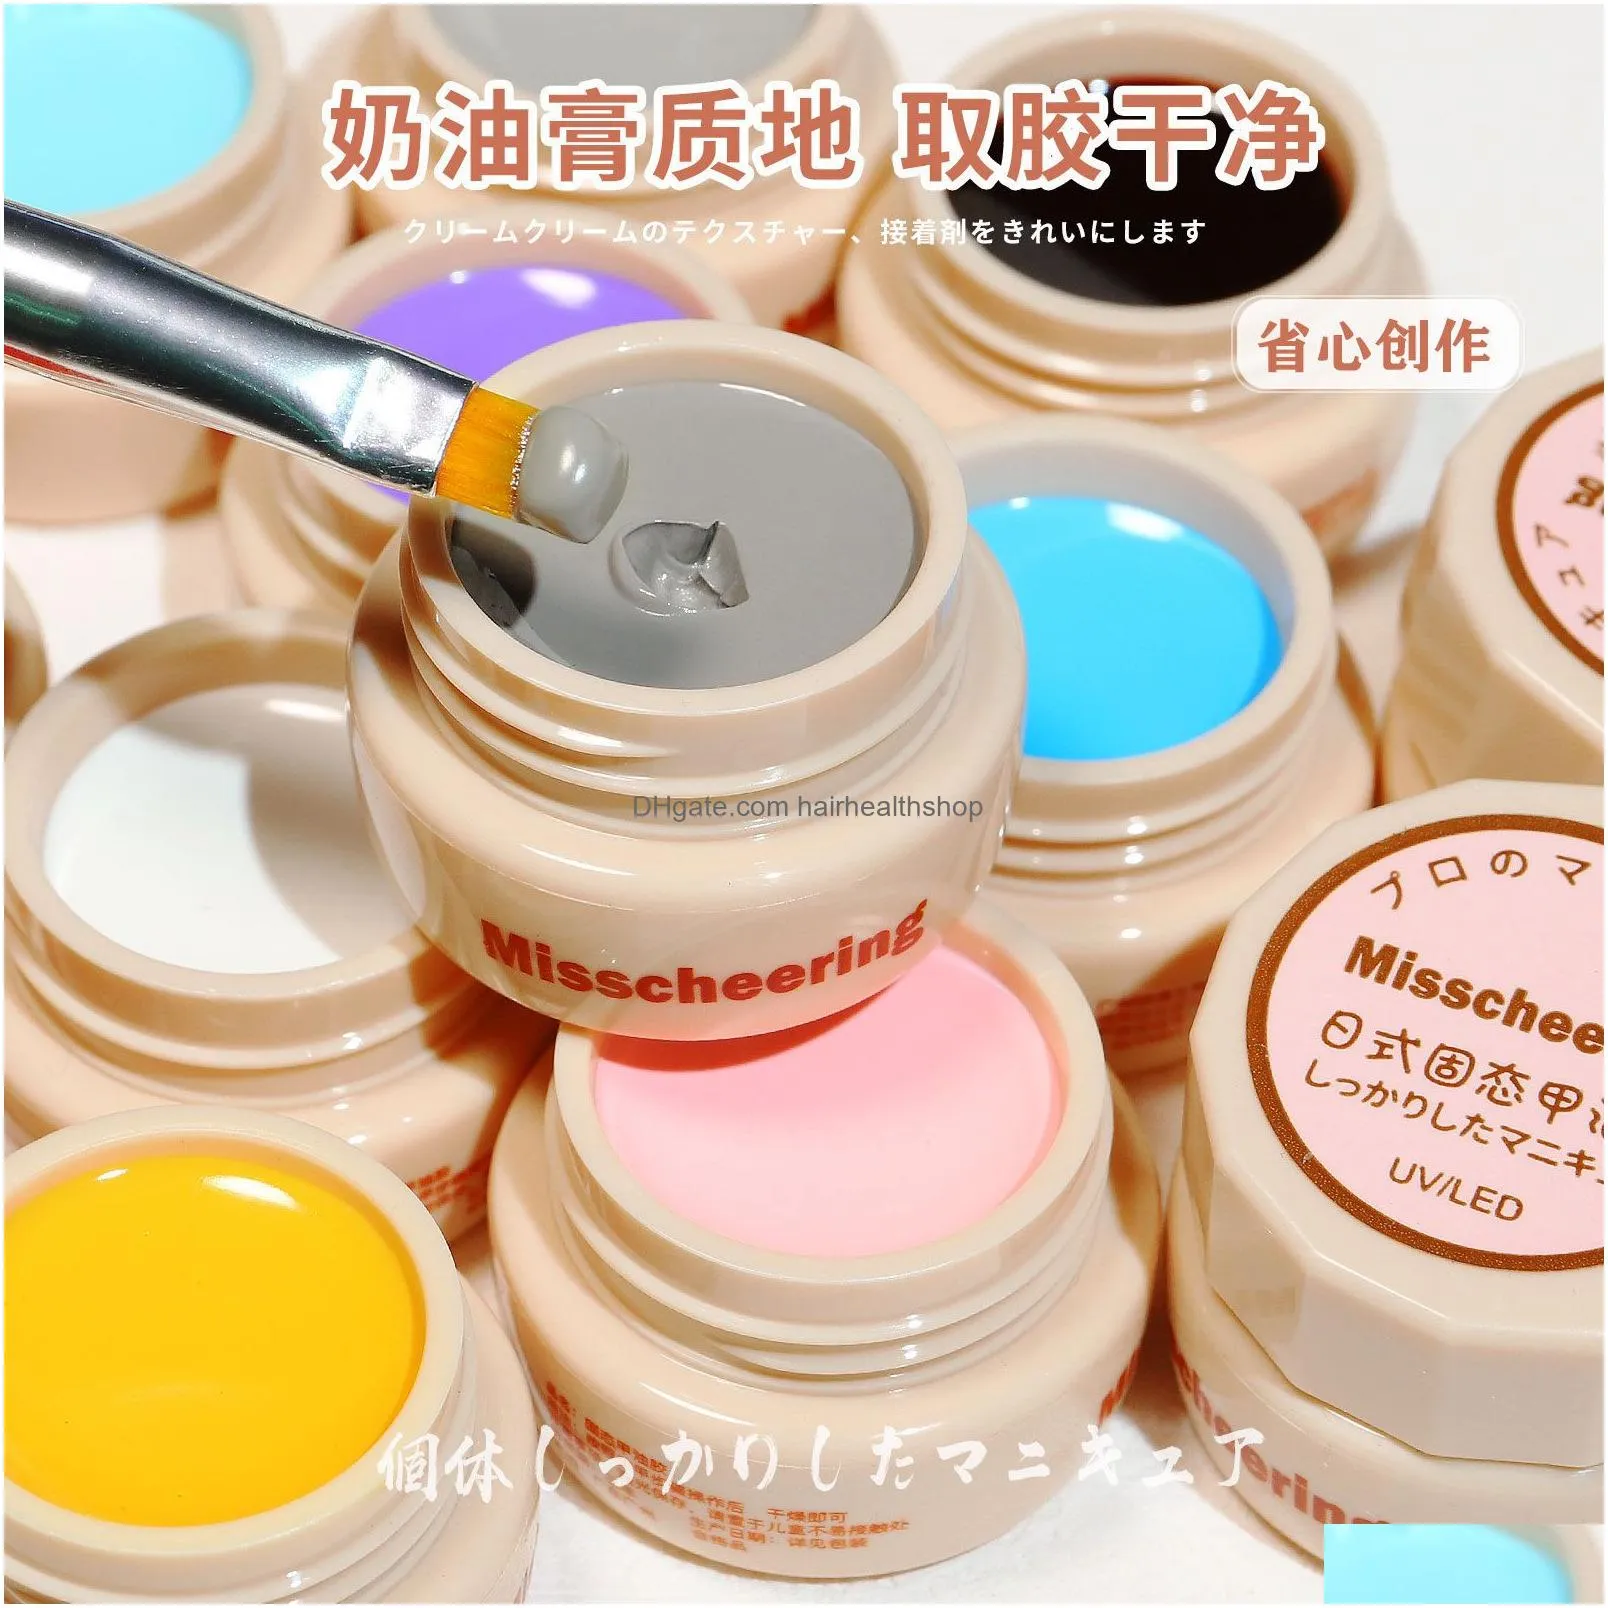 Nail Polish 22 Colors Set 5ml Japanese Cream Soild Gel Drawing Painting P otherapy UV Manicure No flow Travel sized Color 230921